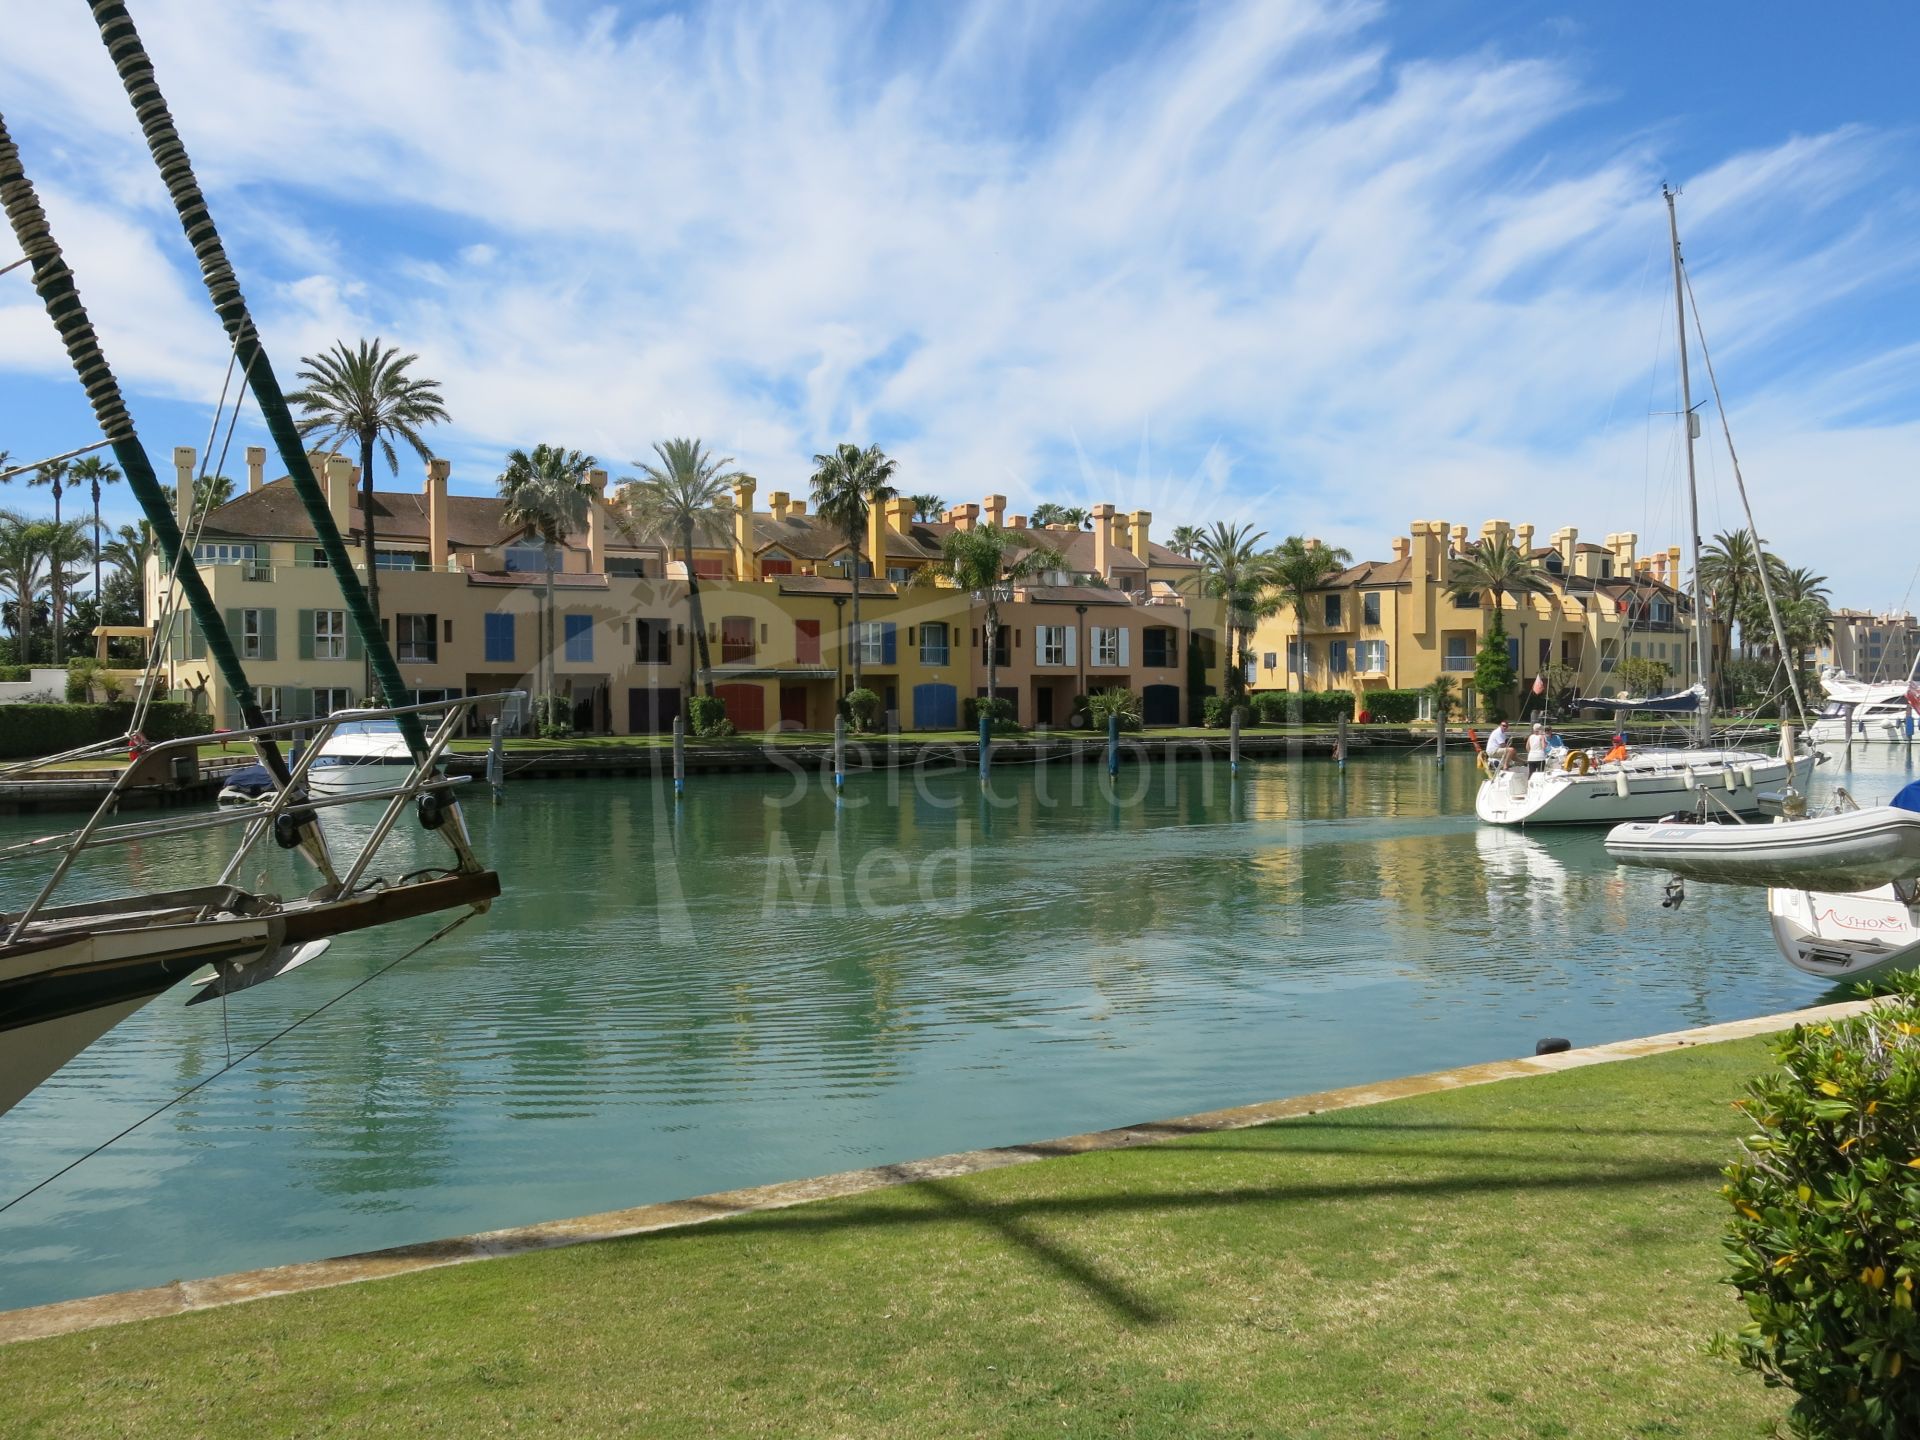 Beautiful Corner Townhouse in Sotogrande Marina with Views to the Sea and Marina.